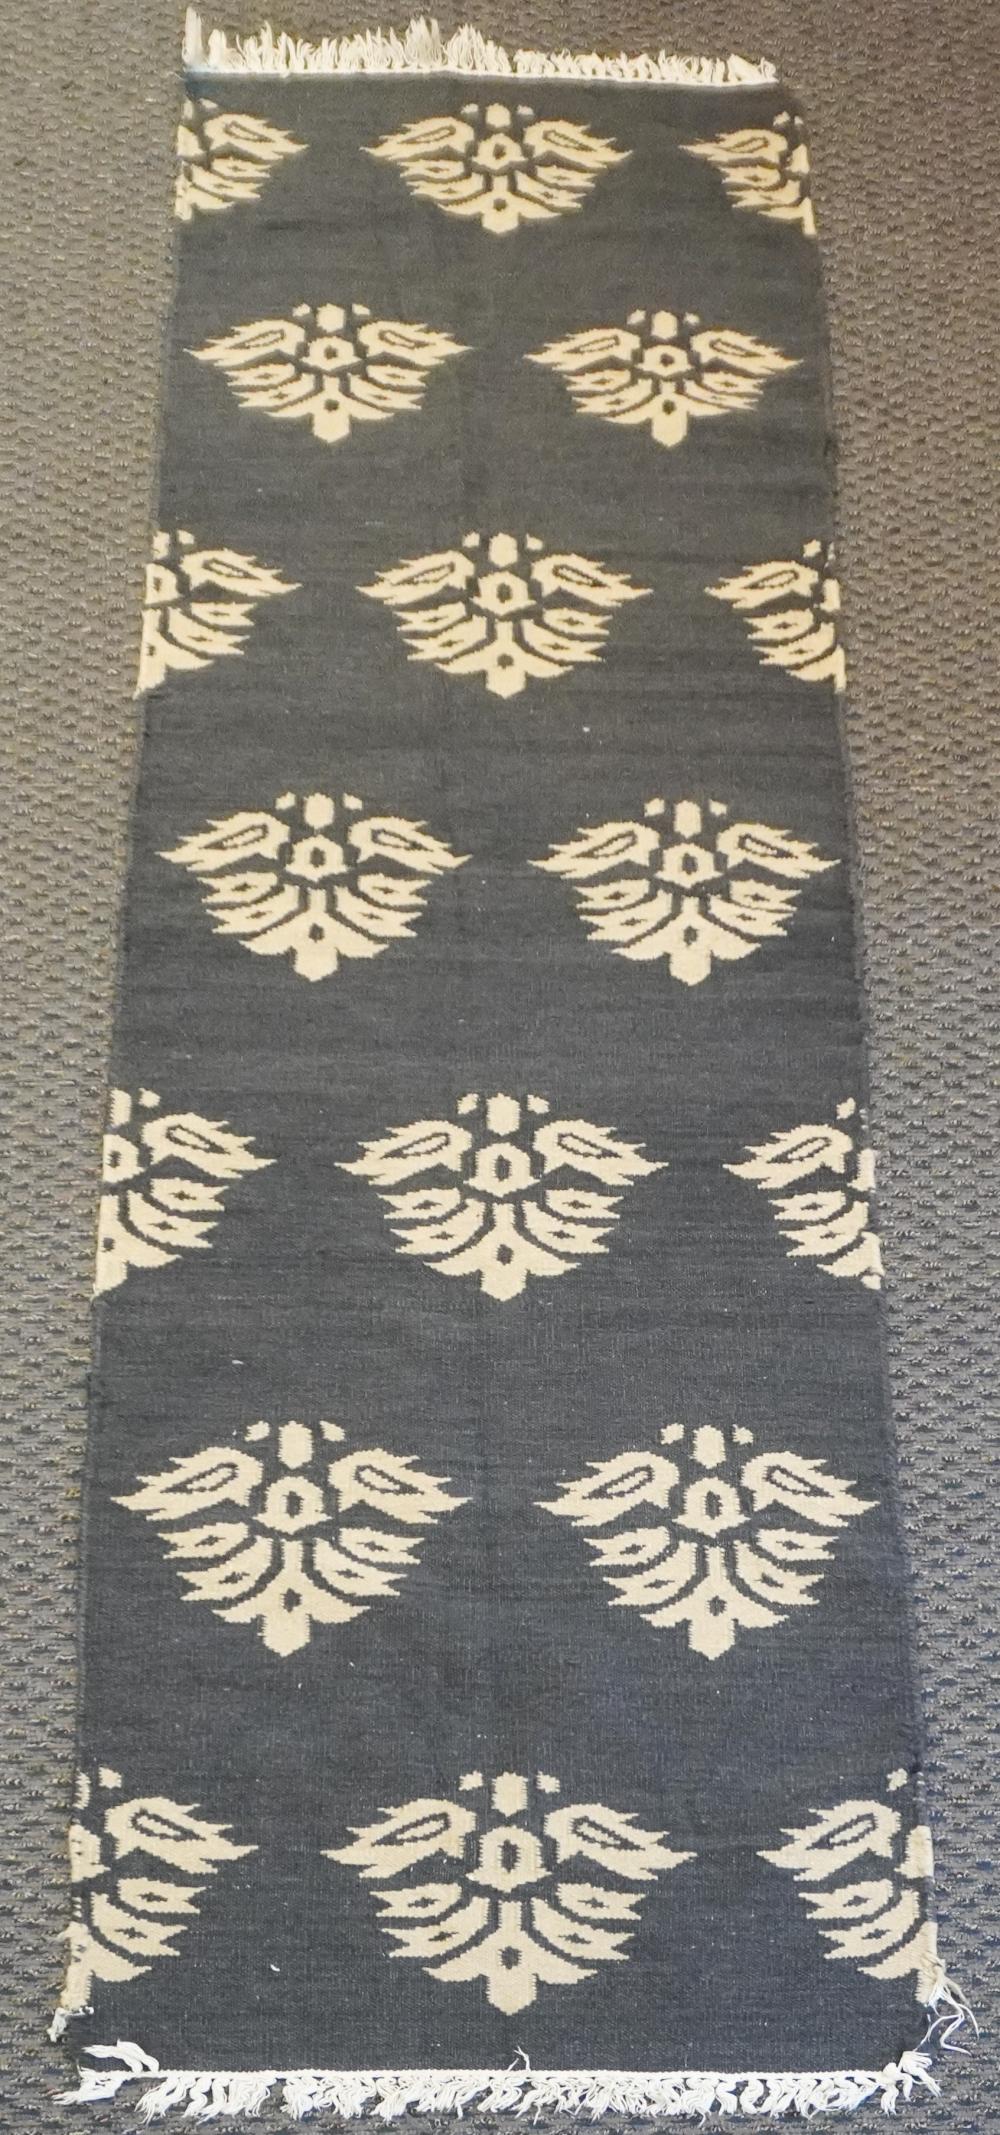 POSSIBLY CENTRAL AMERICAN FLAT-STITCH